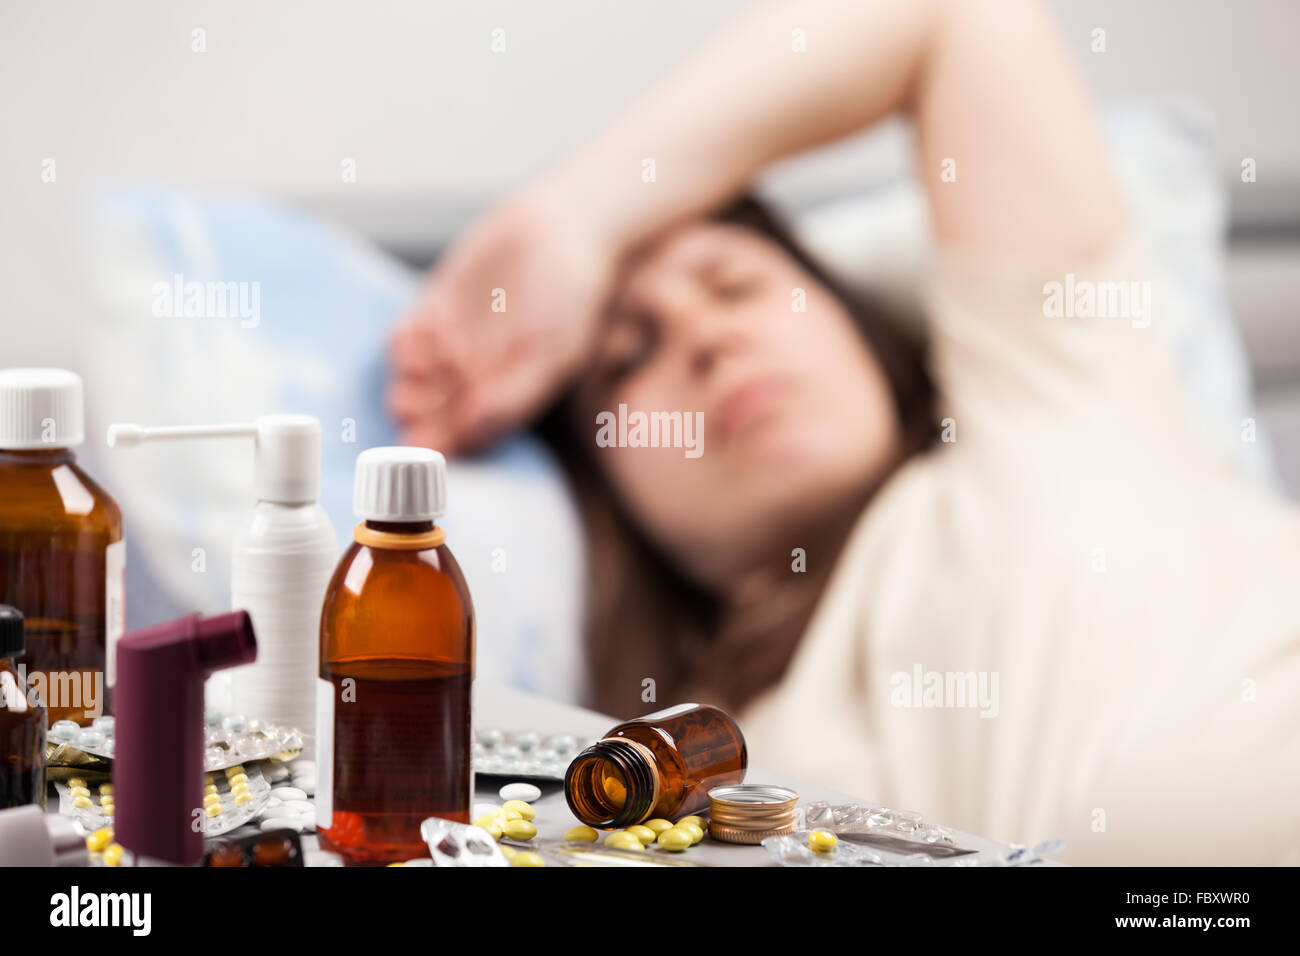 Unwell woman patient lying down bed Stock Photo